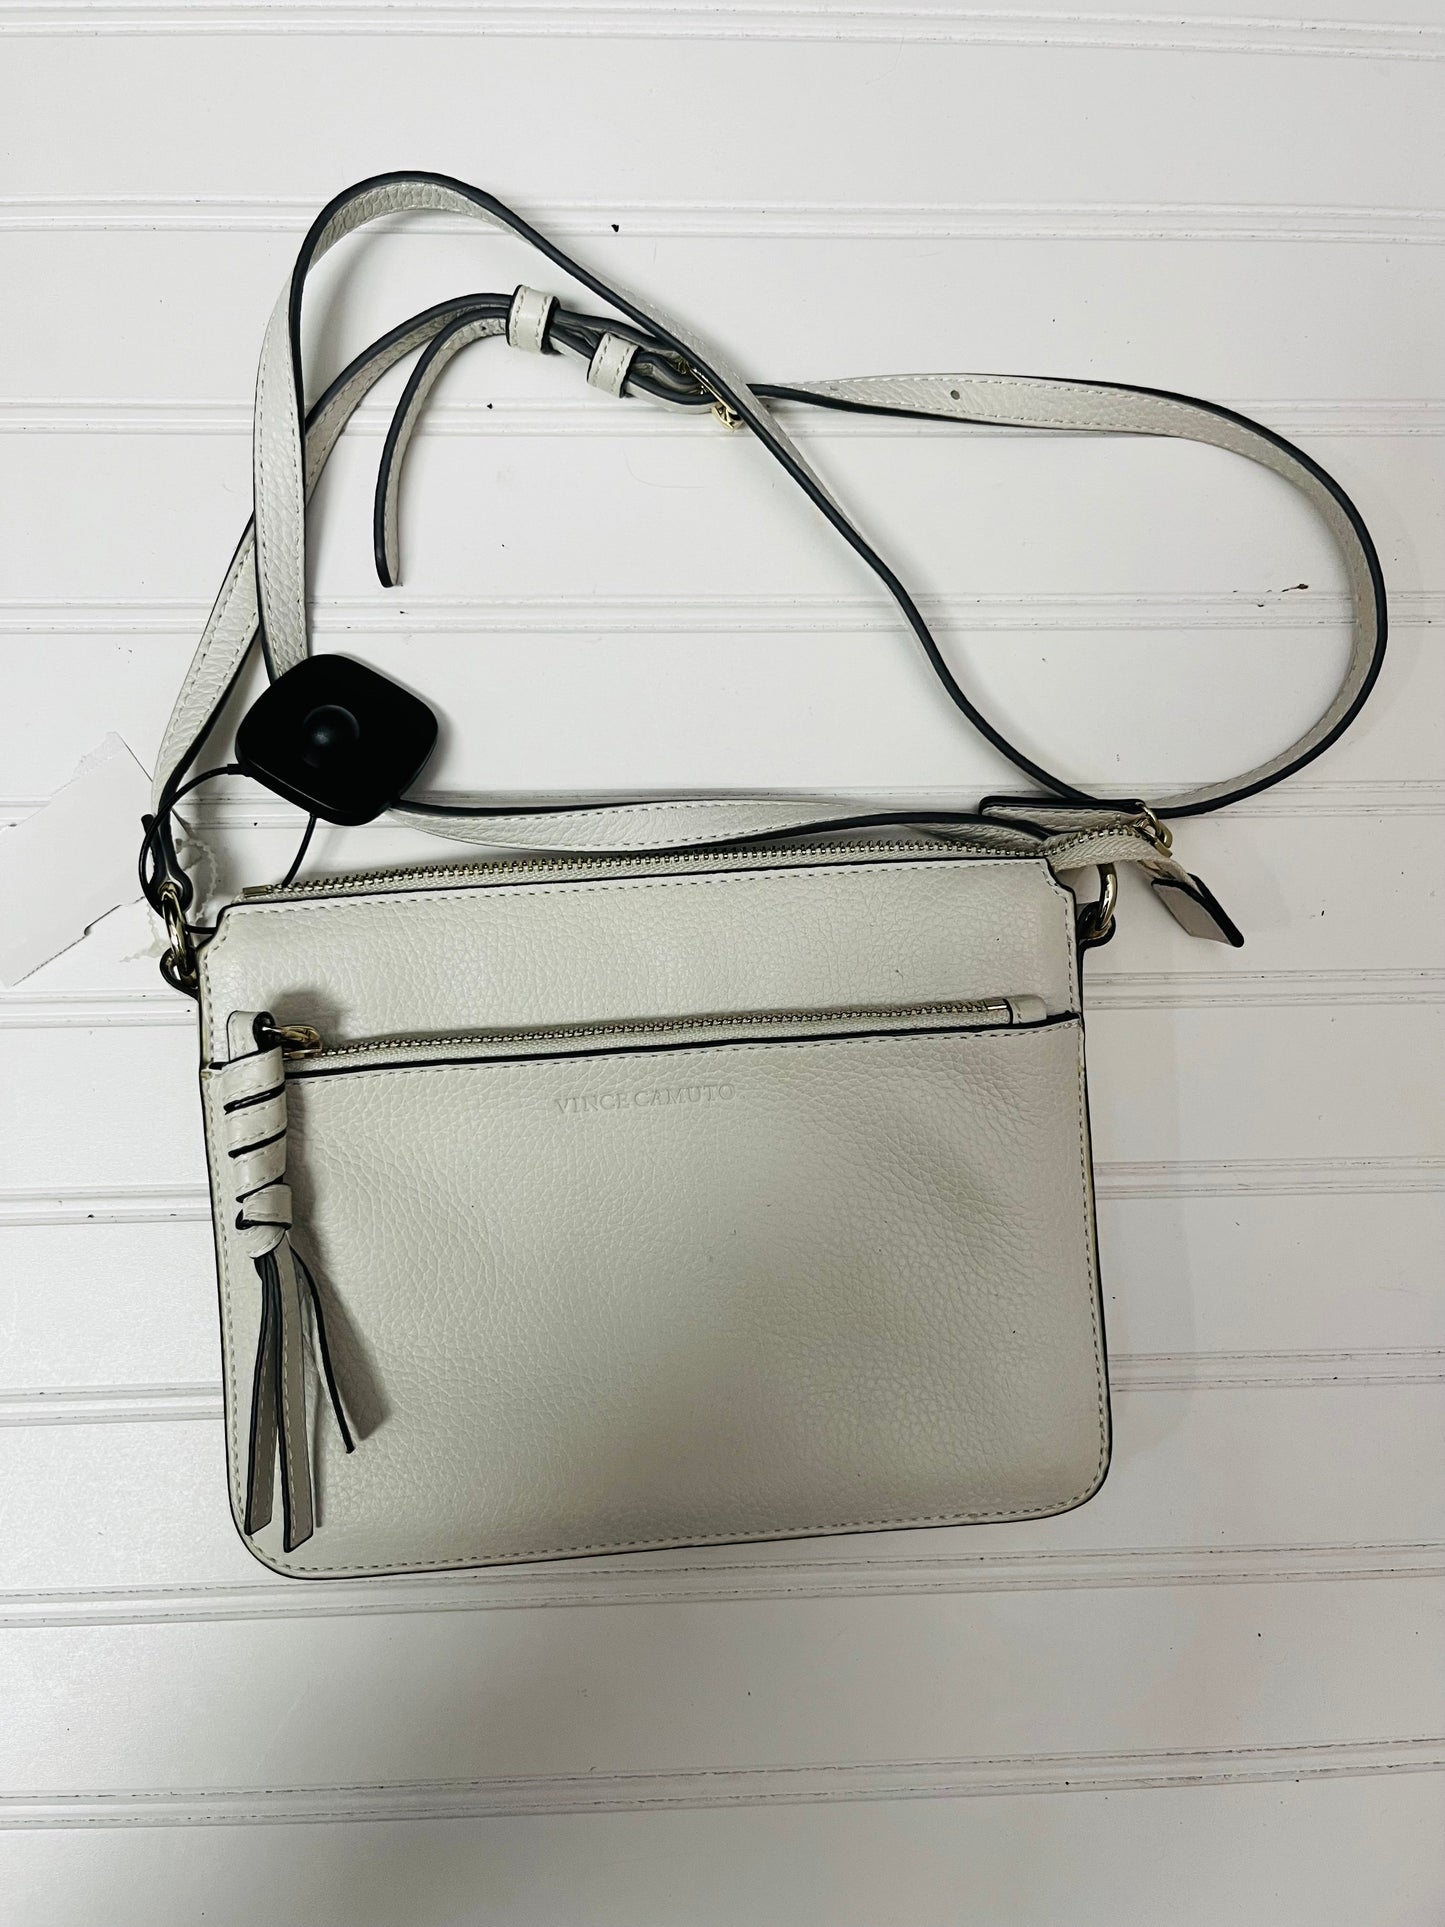 Crossbody Vince Camuto, Size Small